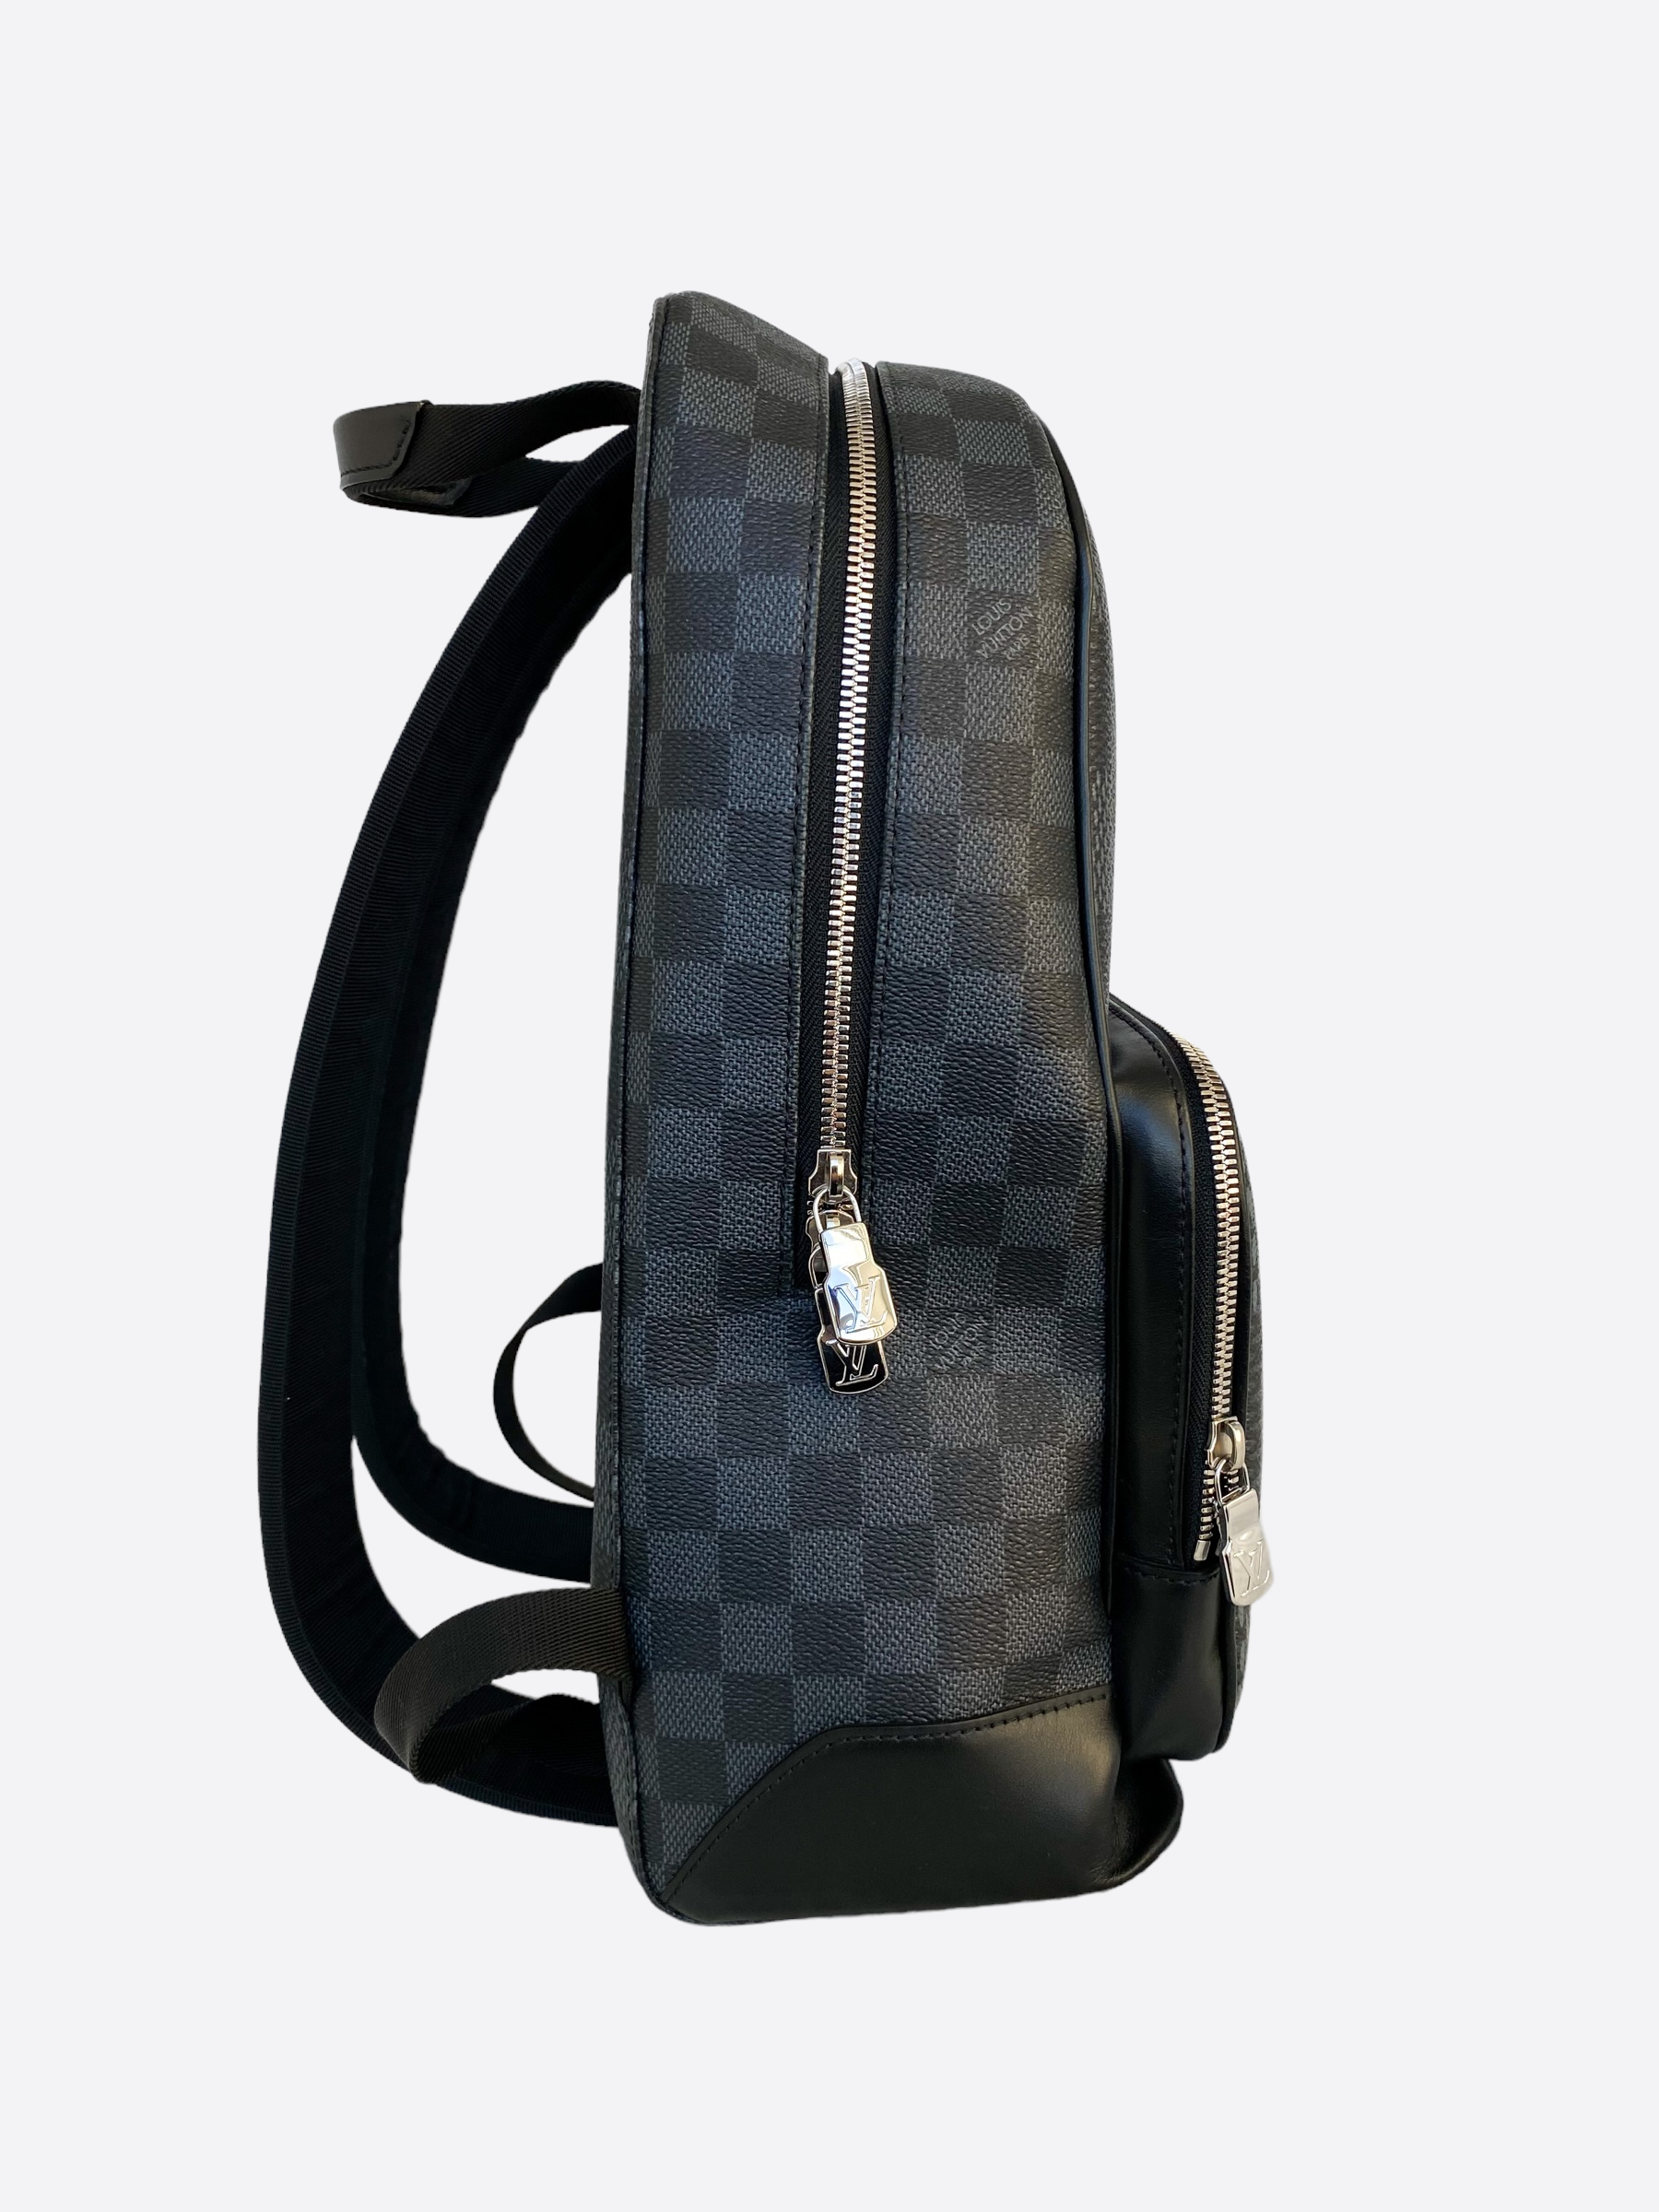 Louis Vuitton Damier Graphite Canvas Campus Backpack - Handbag | Pre-owned & Certified | used Second Hand | Unisex